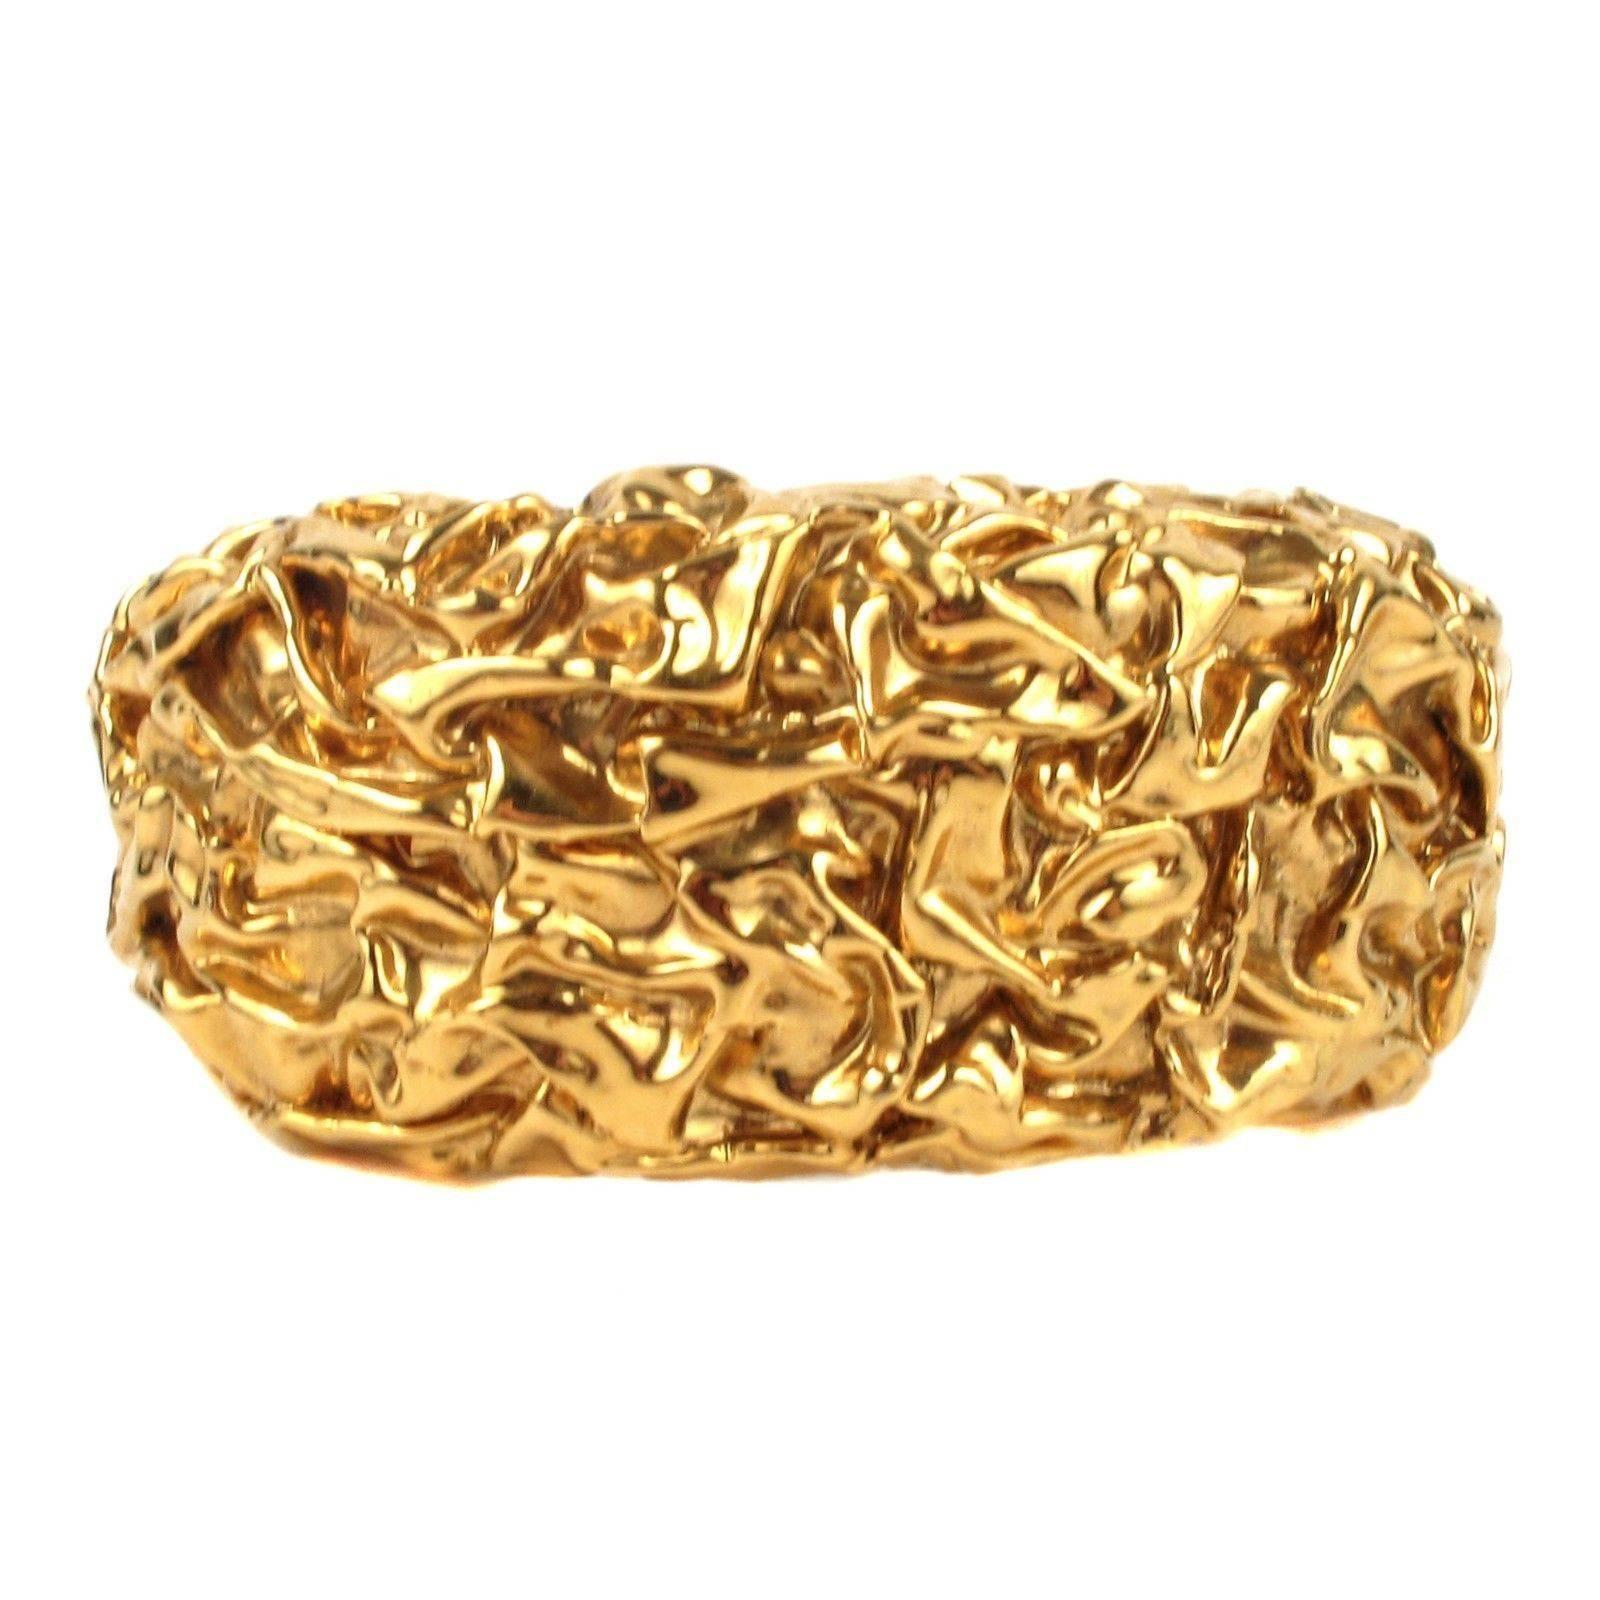 Color: Gold

Material: Metal

Size: Fits like a size Small

------------------------------------------------------------
 
Details:

- textured metal

- magnetic closure

- stamped 2 CC 3 - from collection 23

- item #